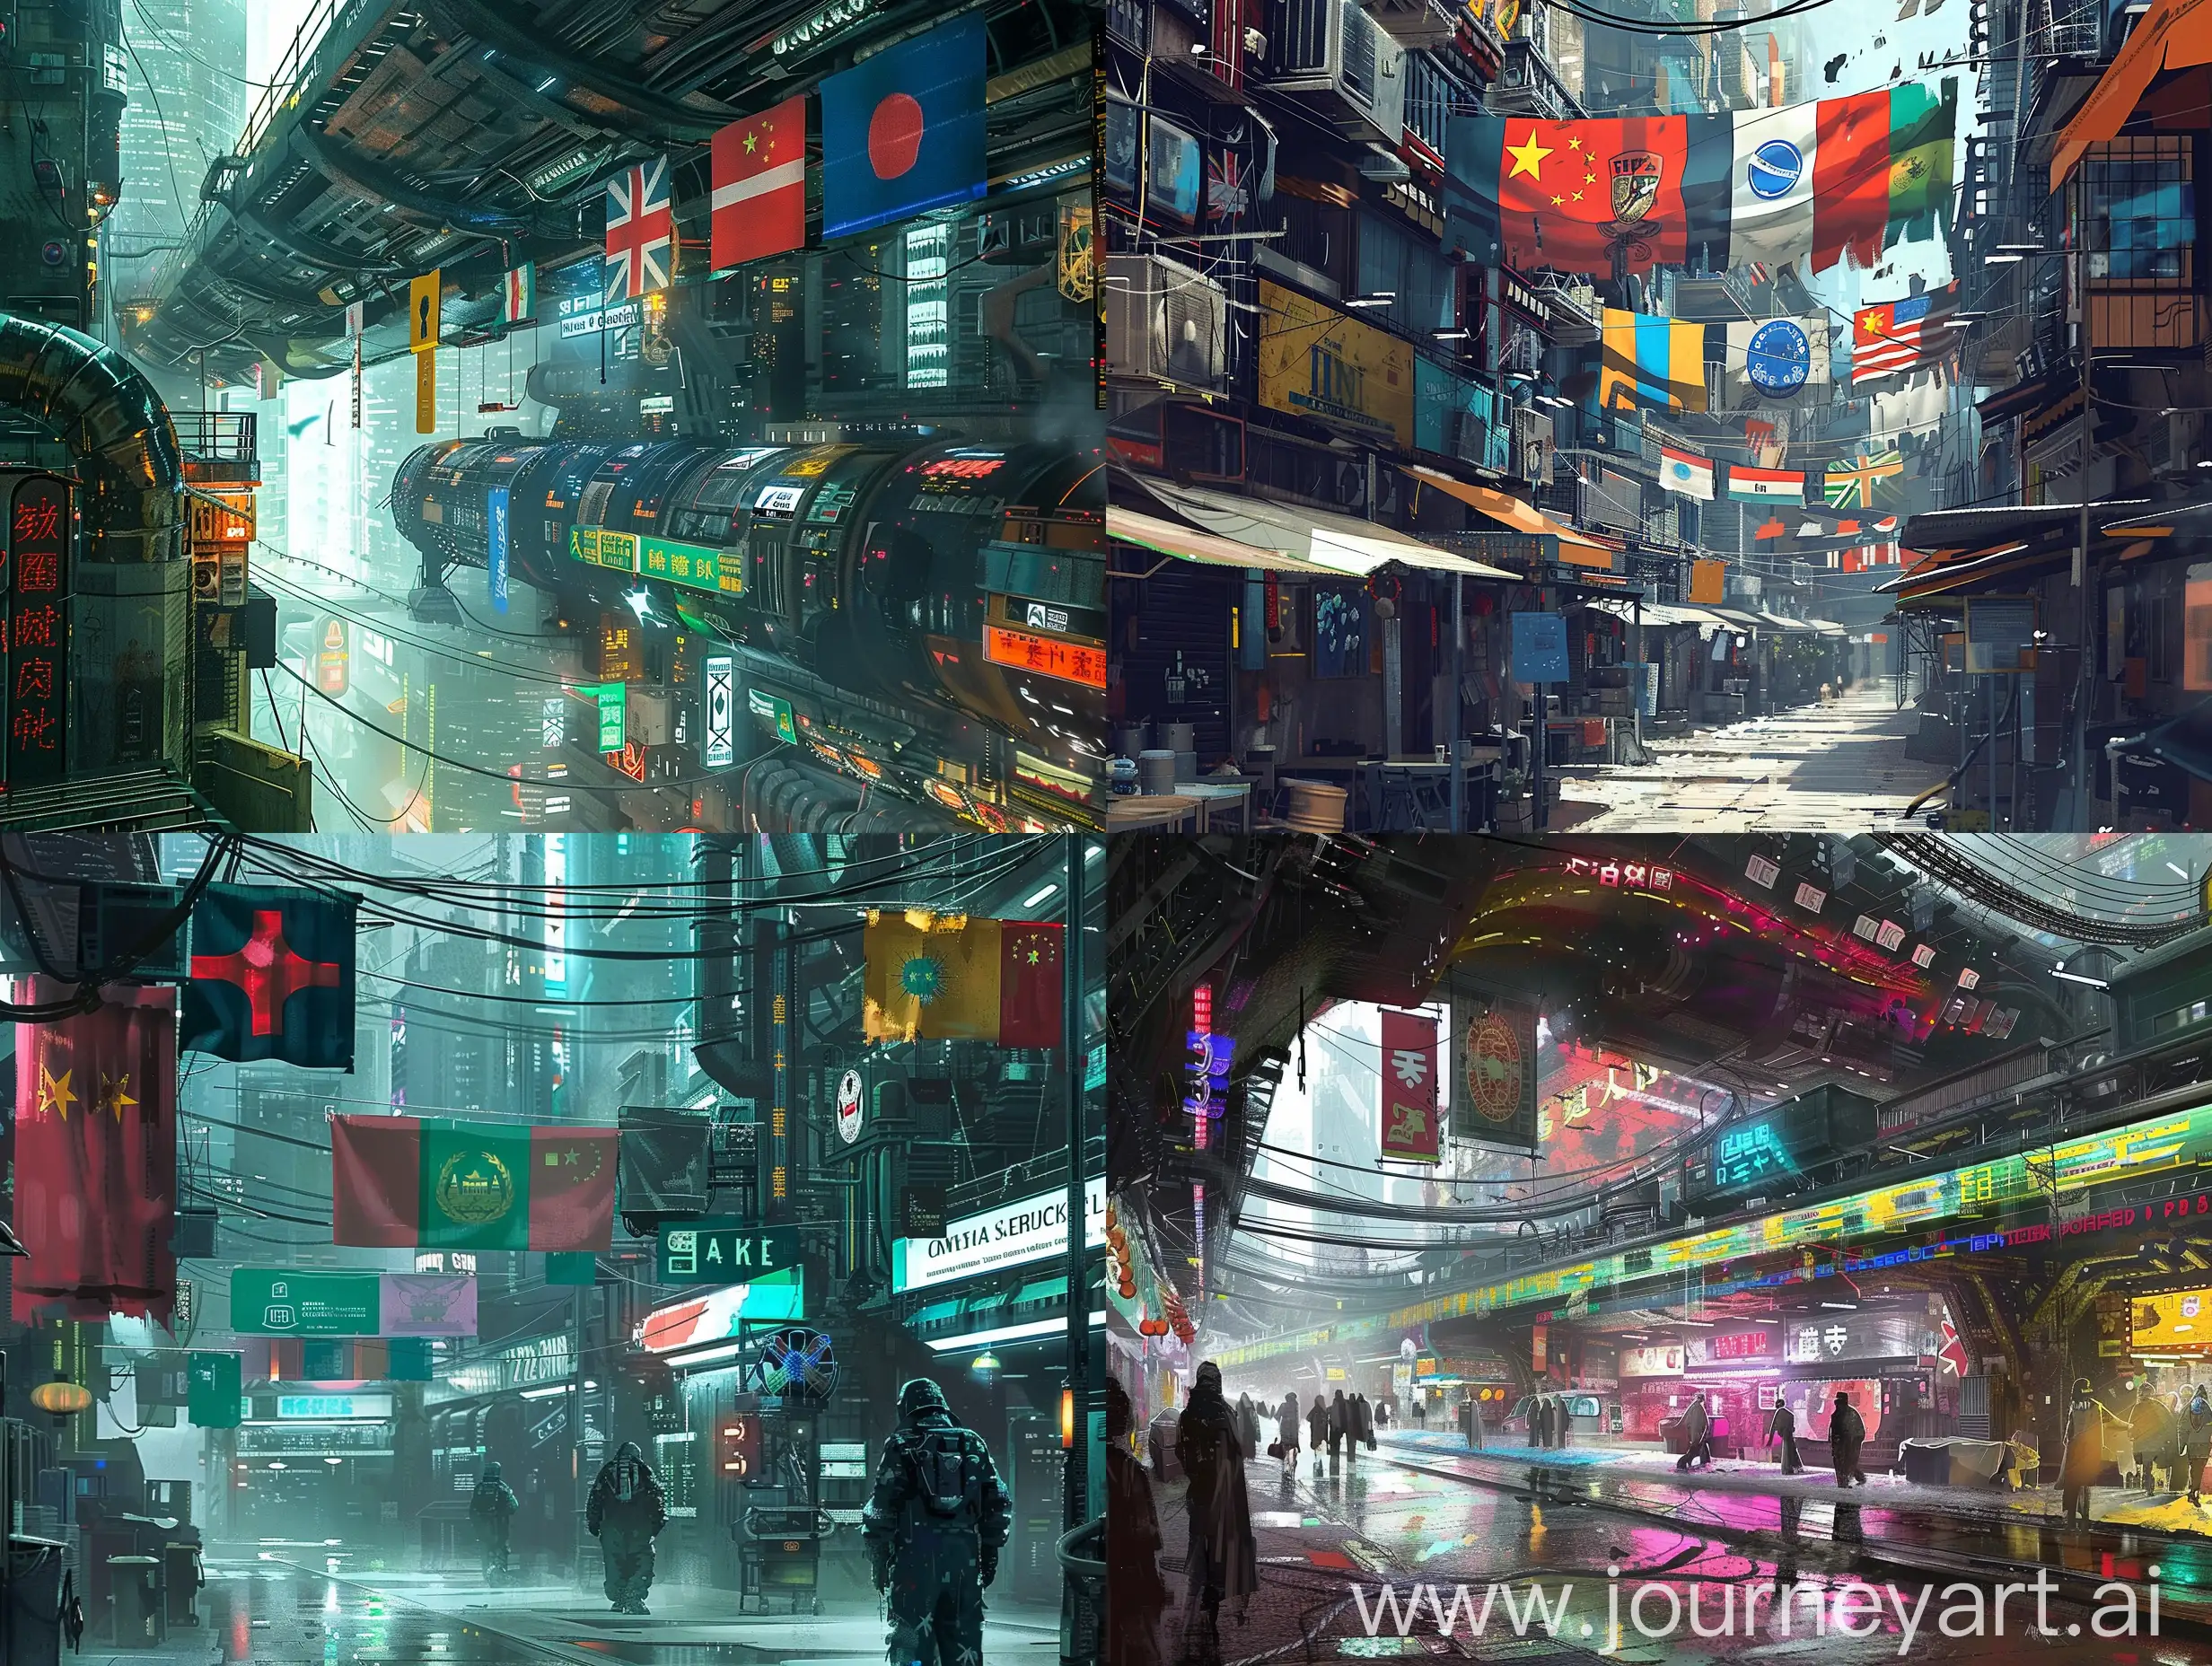 Cyberpunk-Business-District-with-Silk-Road-Nations-Flags